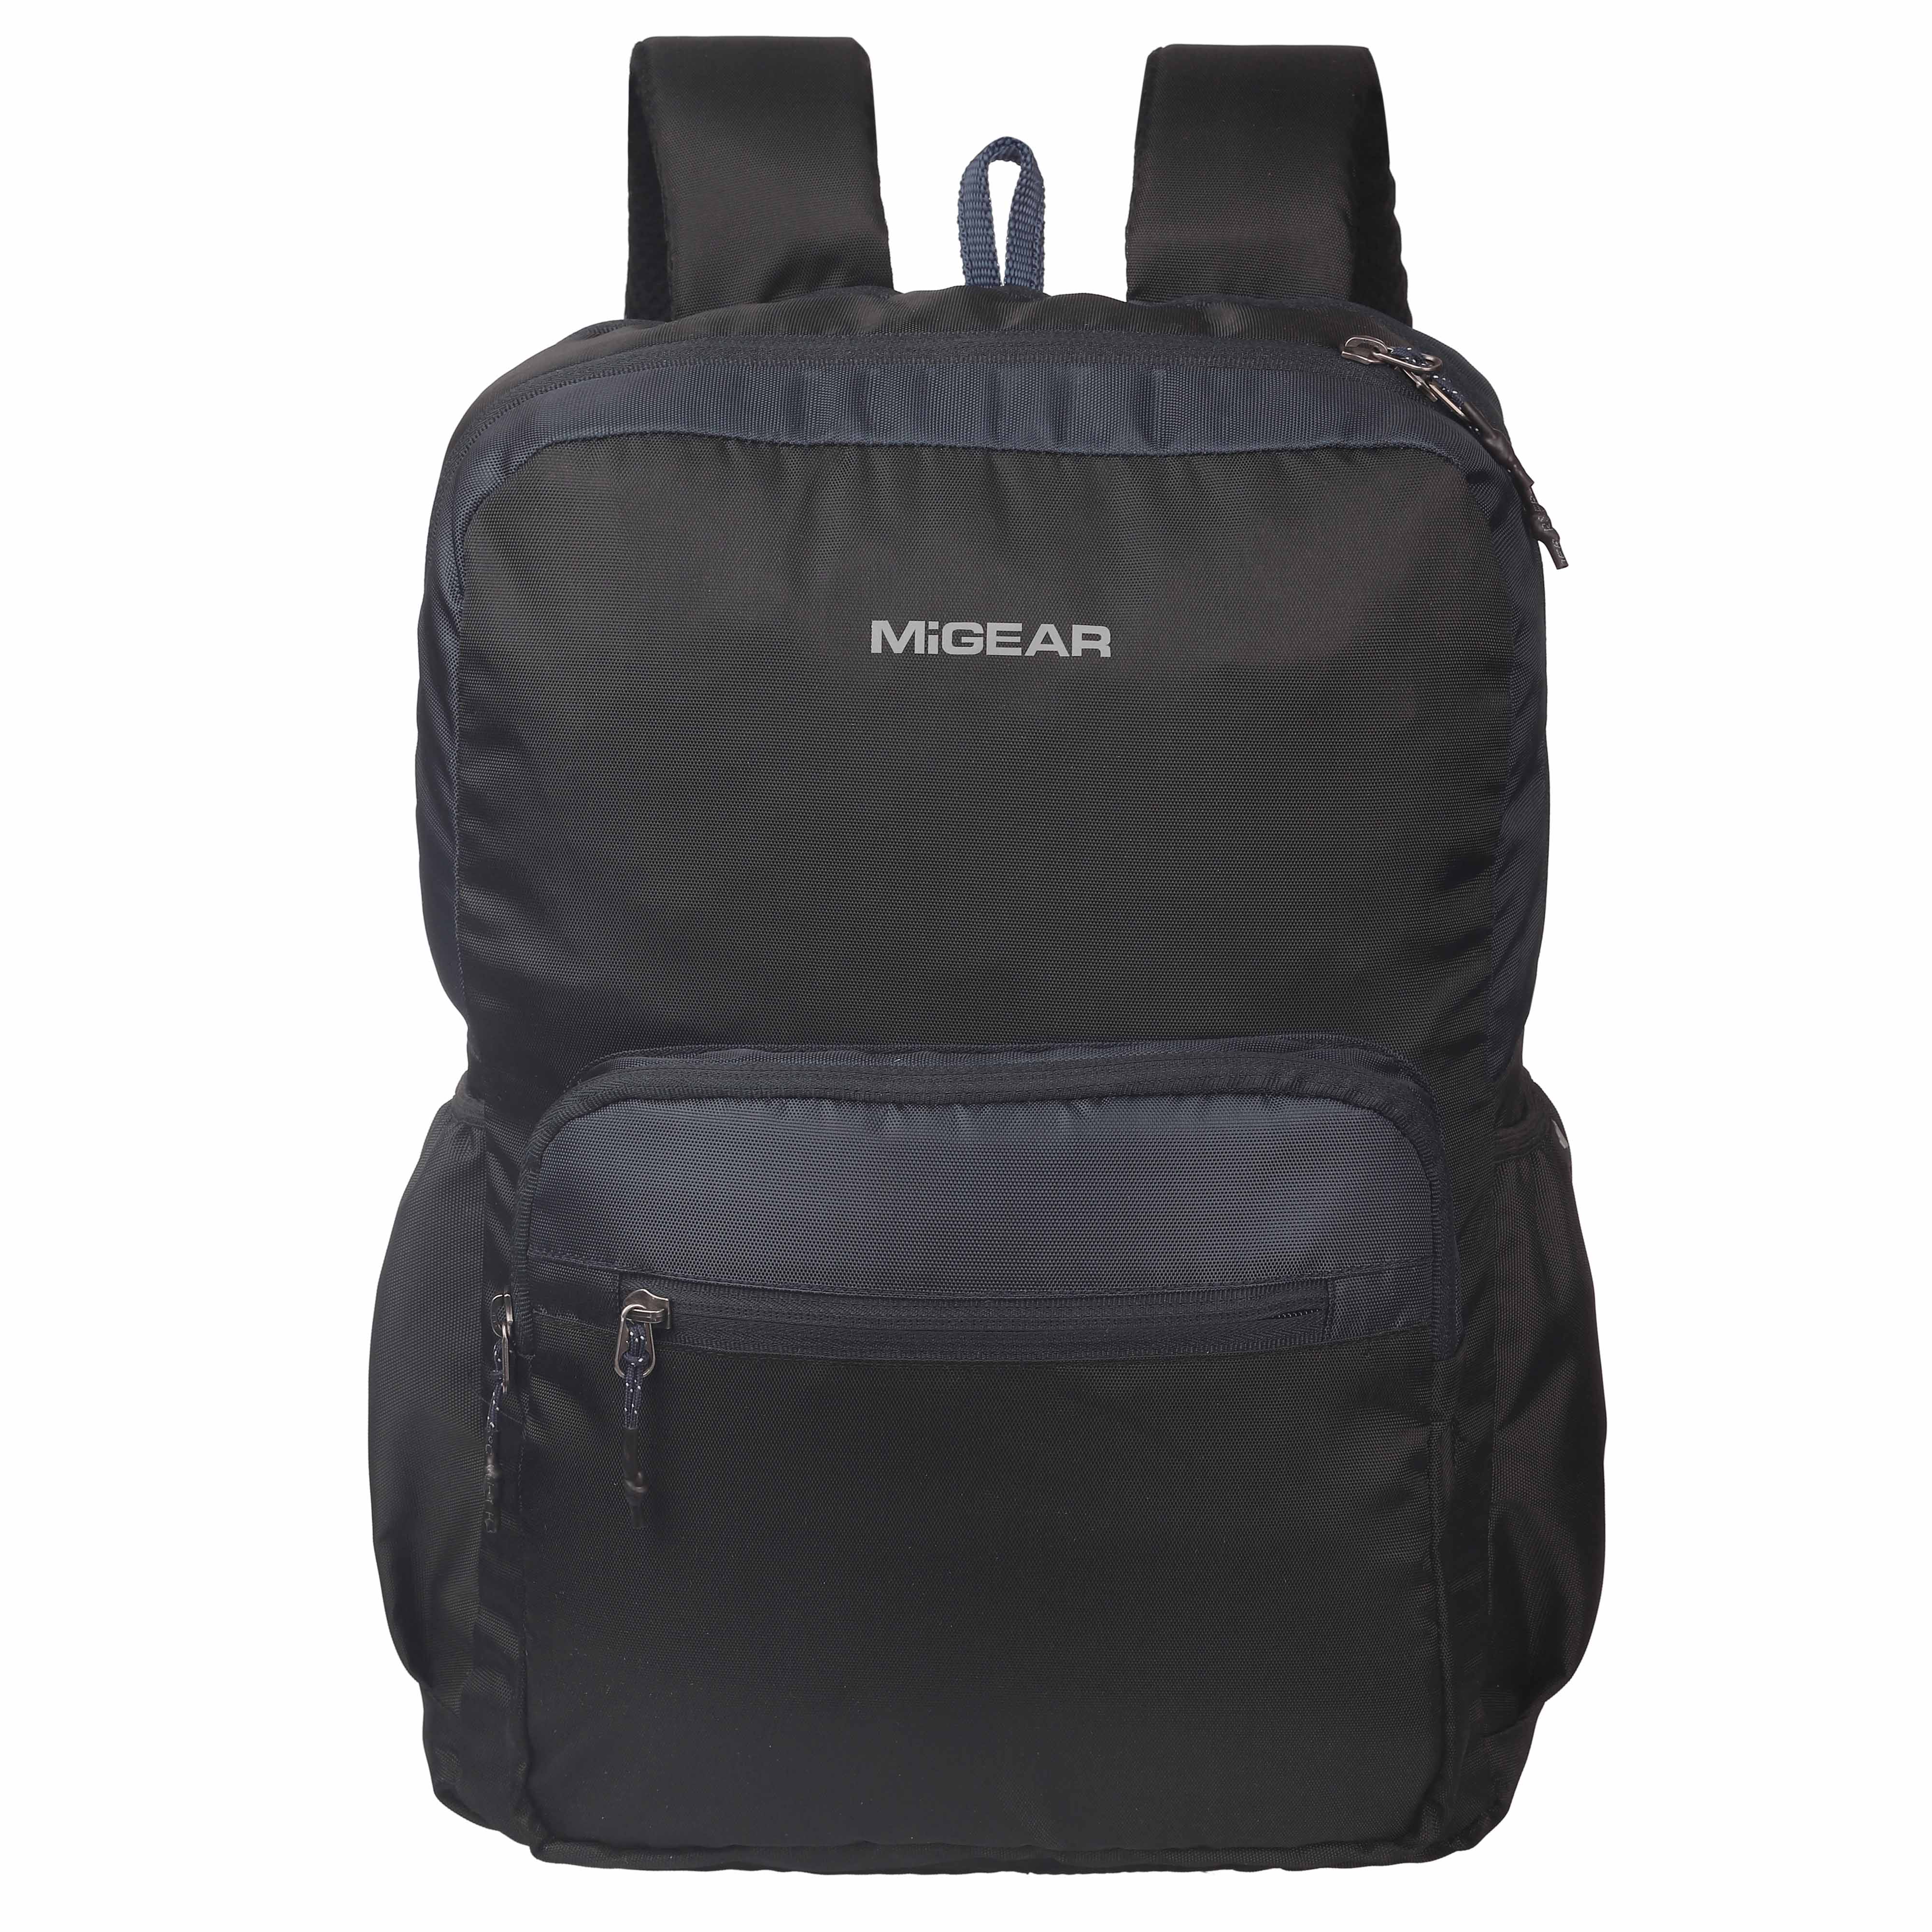 The Insignia Backpack